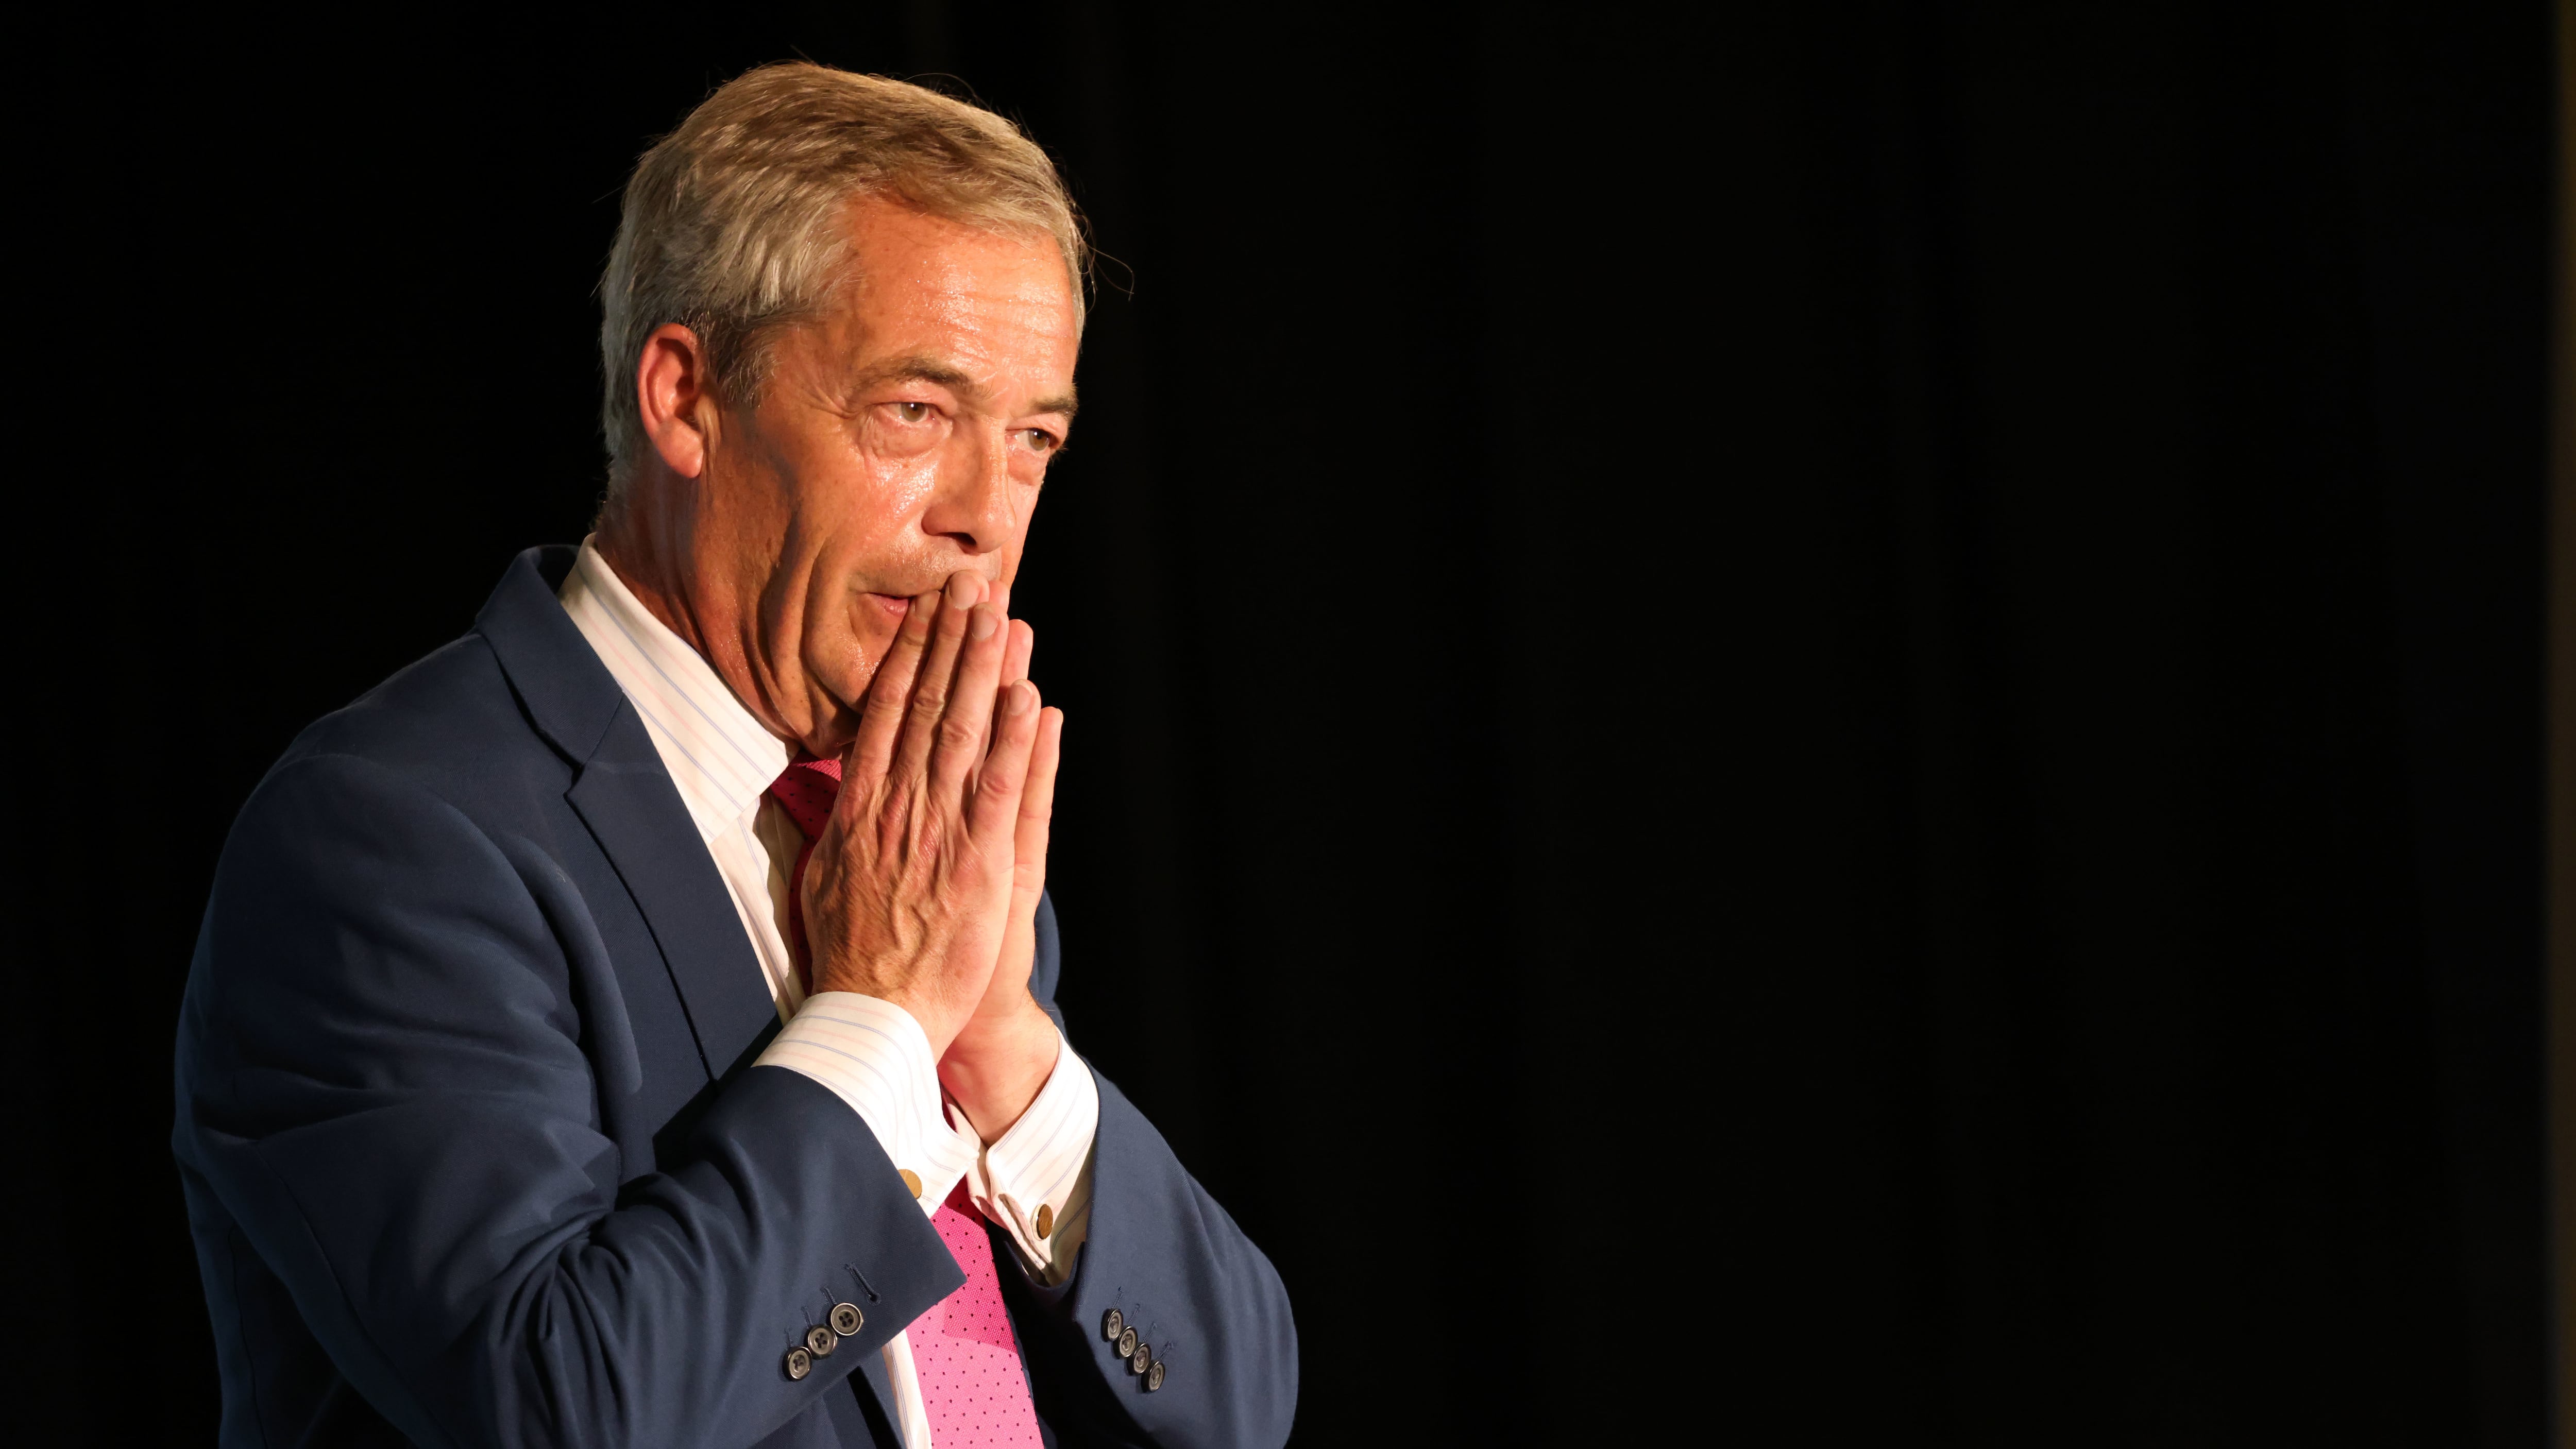 Nigel Farage has sought to distance himself from his campaigners’ comments